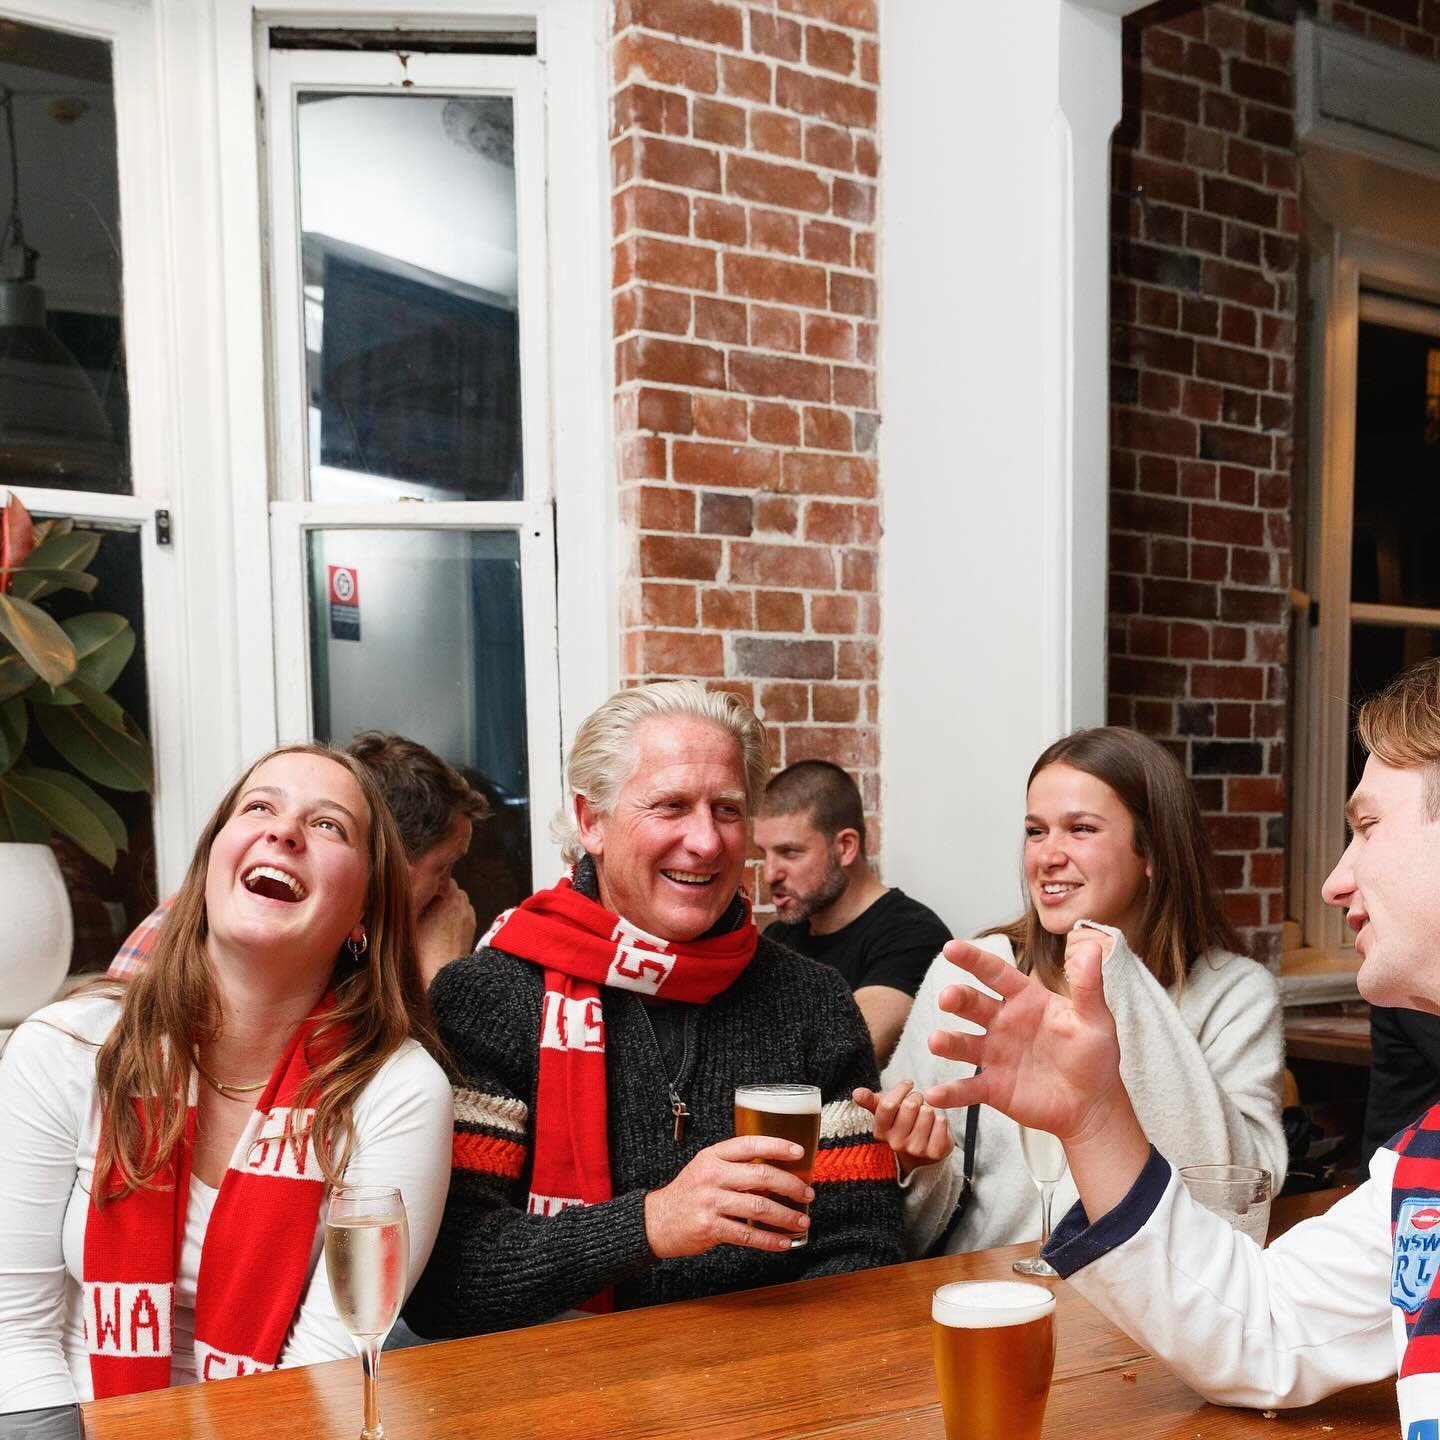 Come join us to watch the Swans smash the GWS Giants today at 1:45pm!&nbsp;❤️🤍 

We aren't taking bookings so first in best dressed!
 
Pssst jugs of London Lager are only $20&hellip;🤪